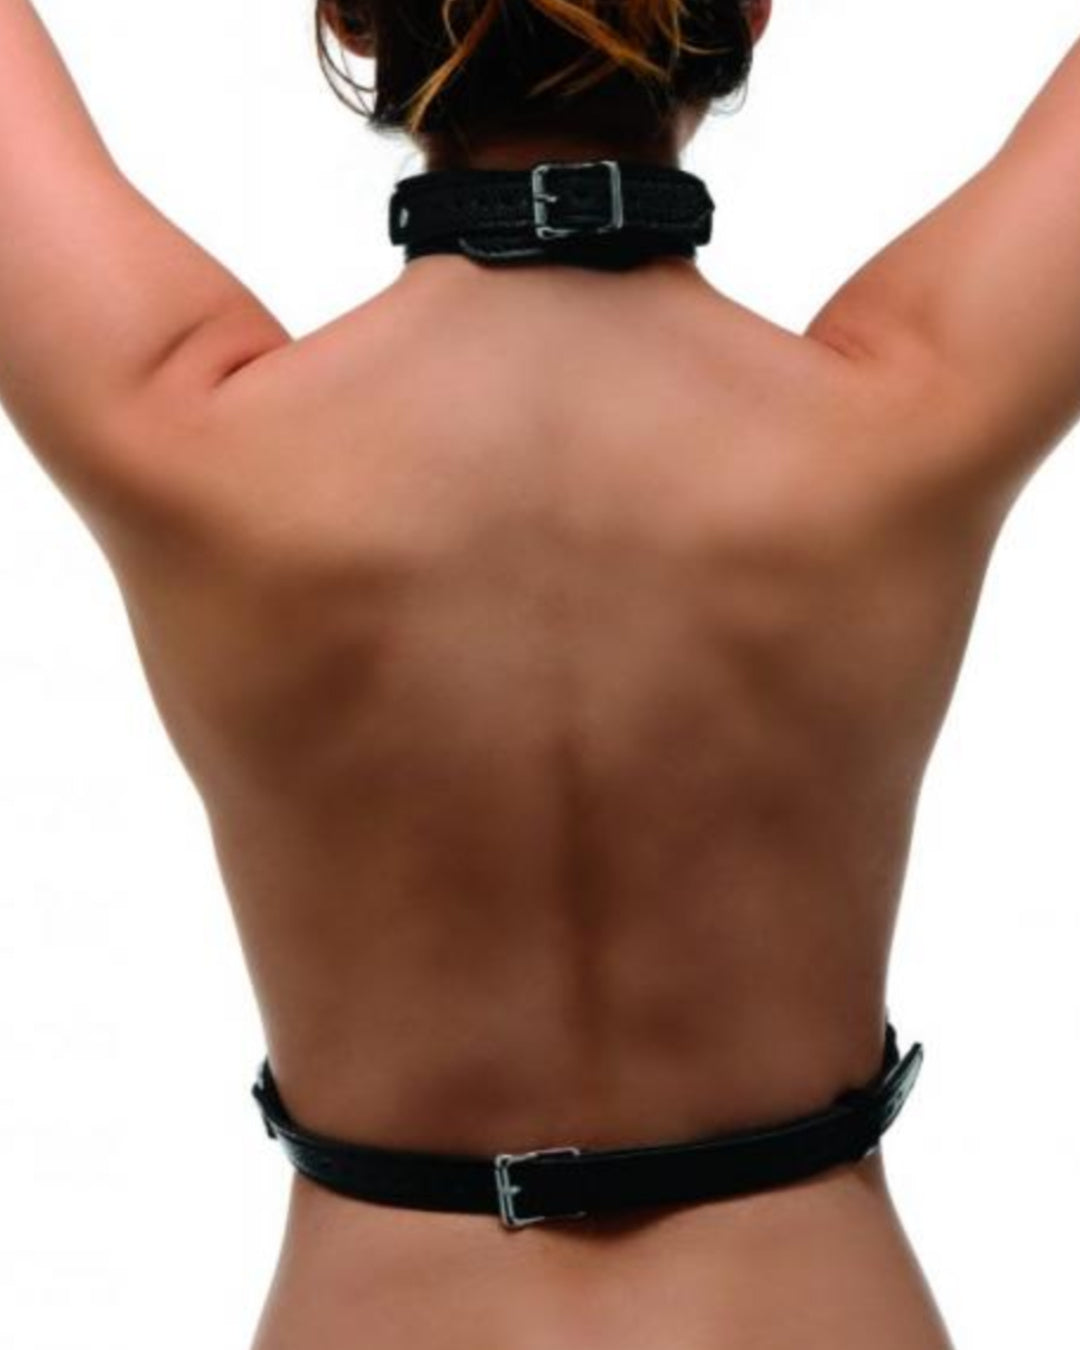 Female Leather Chest Harness - Black Back strap worn by model